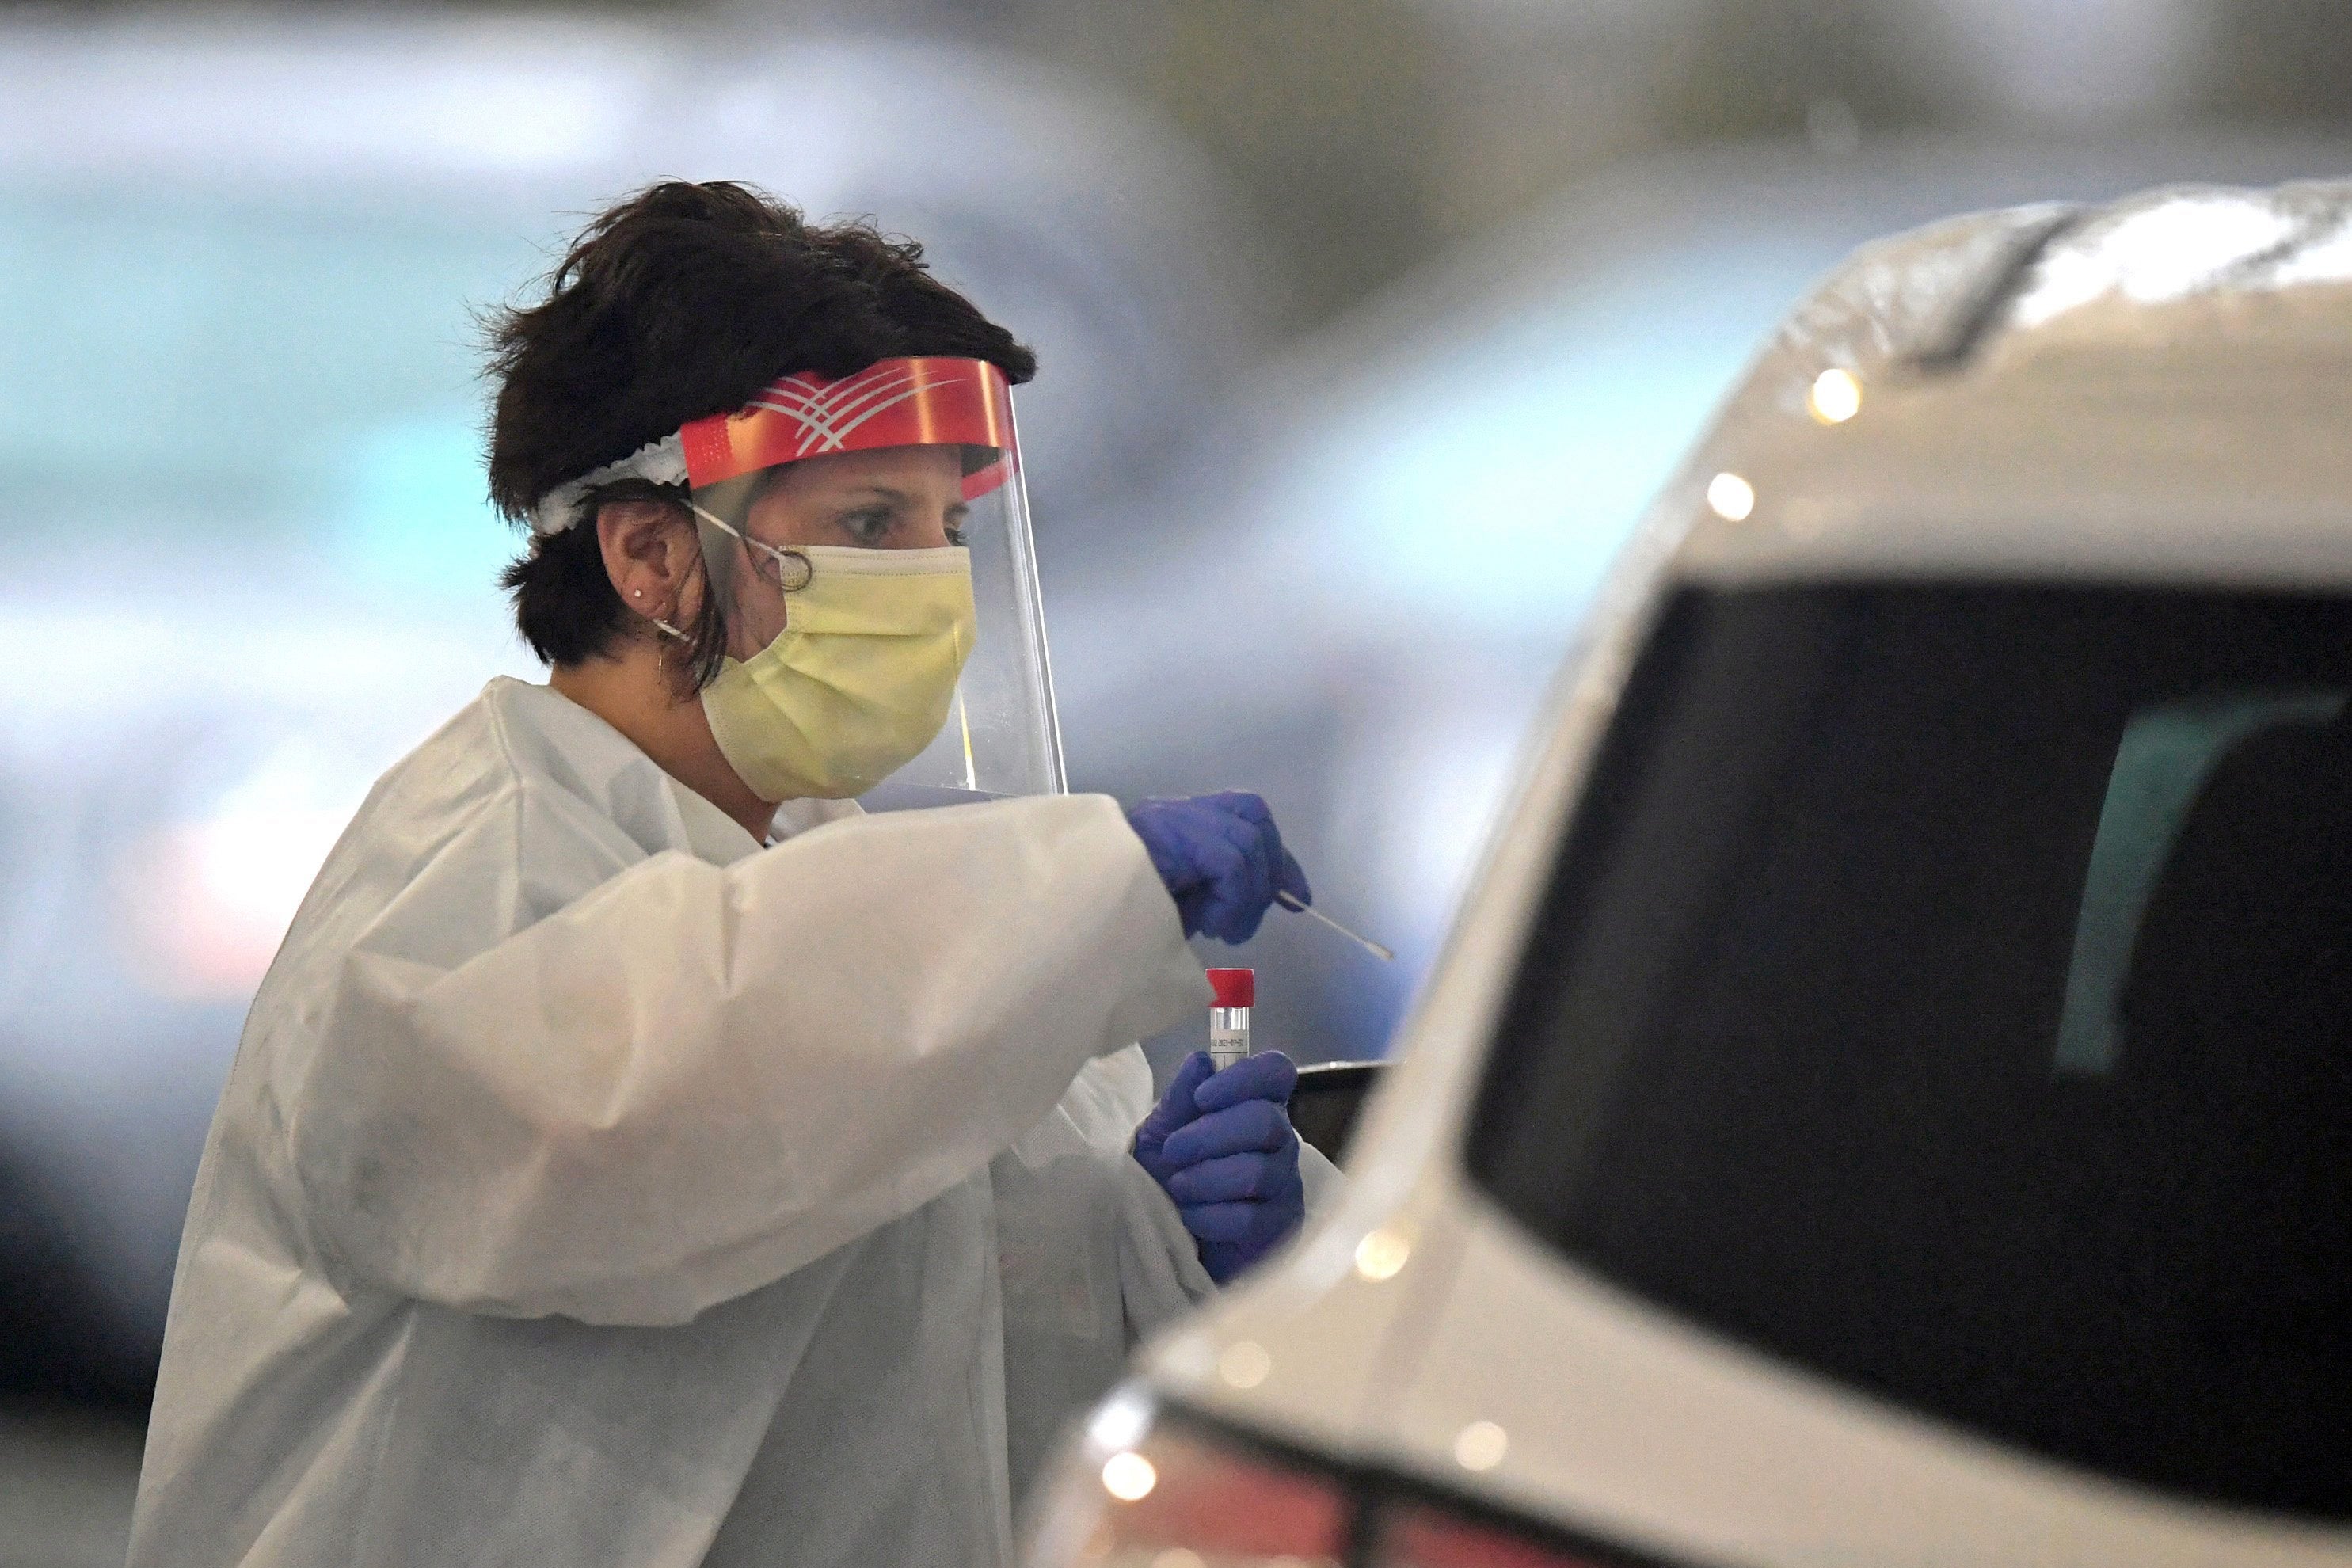 A female medical professional in a mask and other protective gear leans into a car, tube in hand.